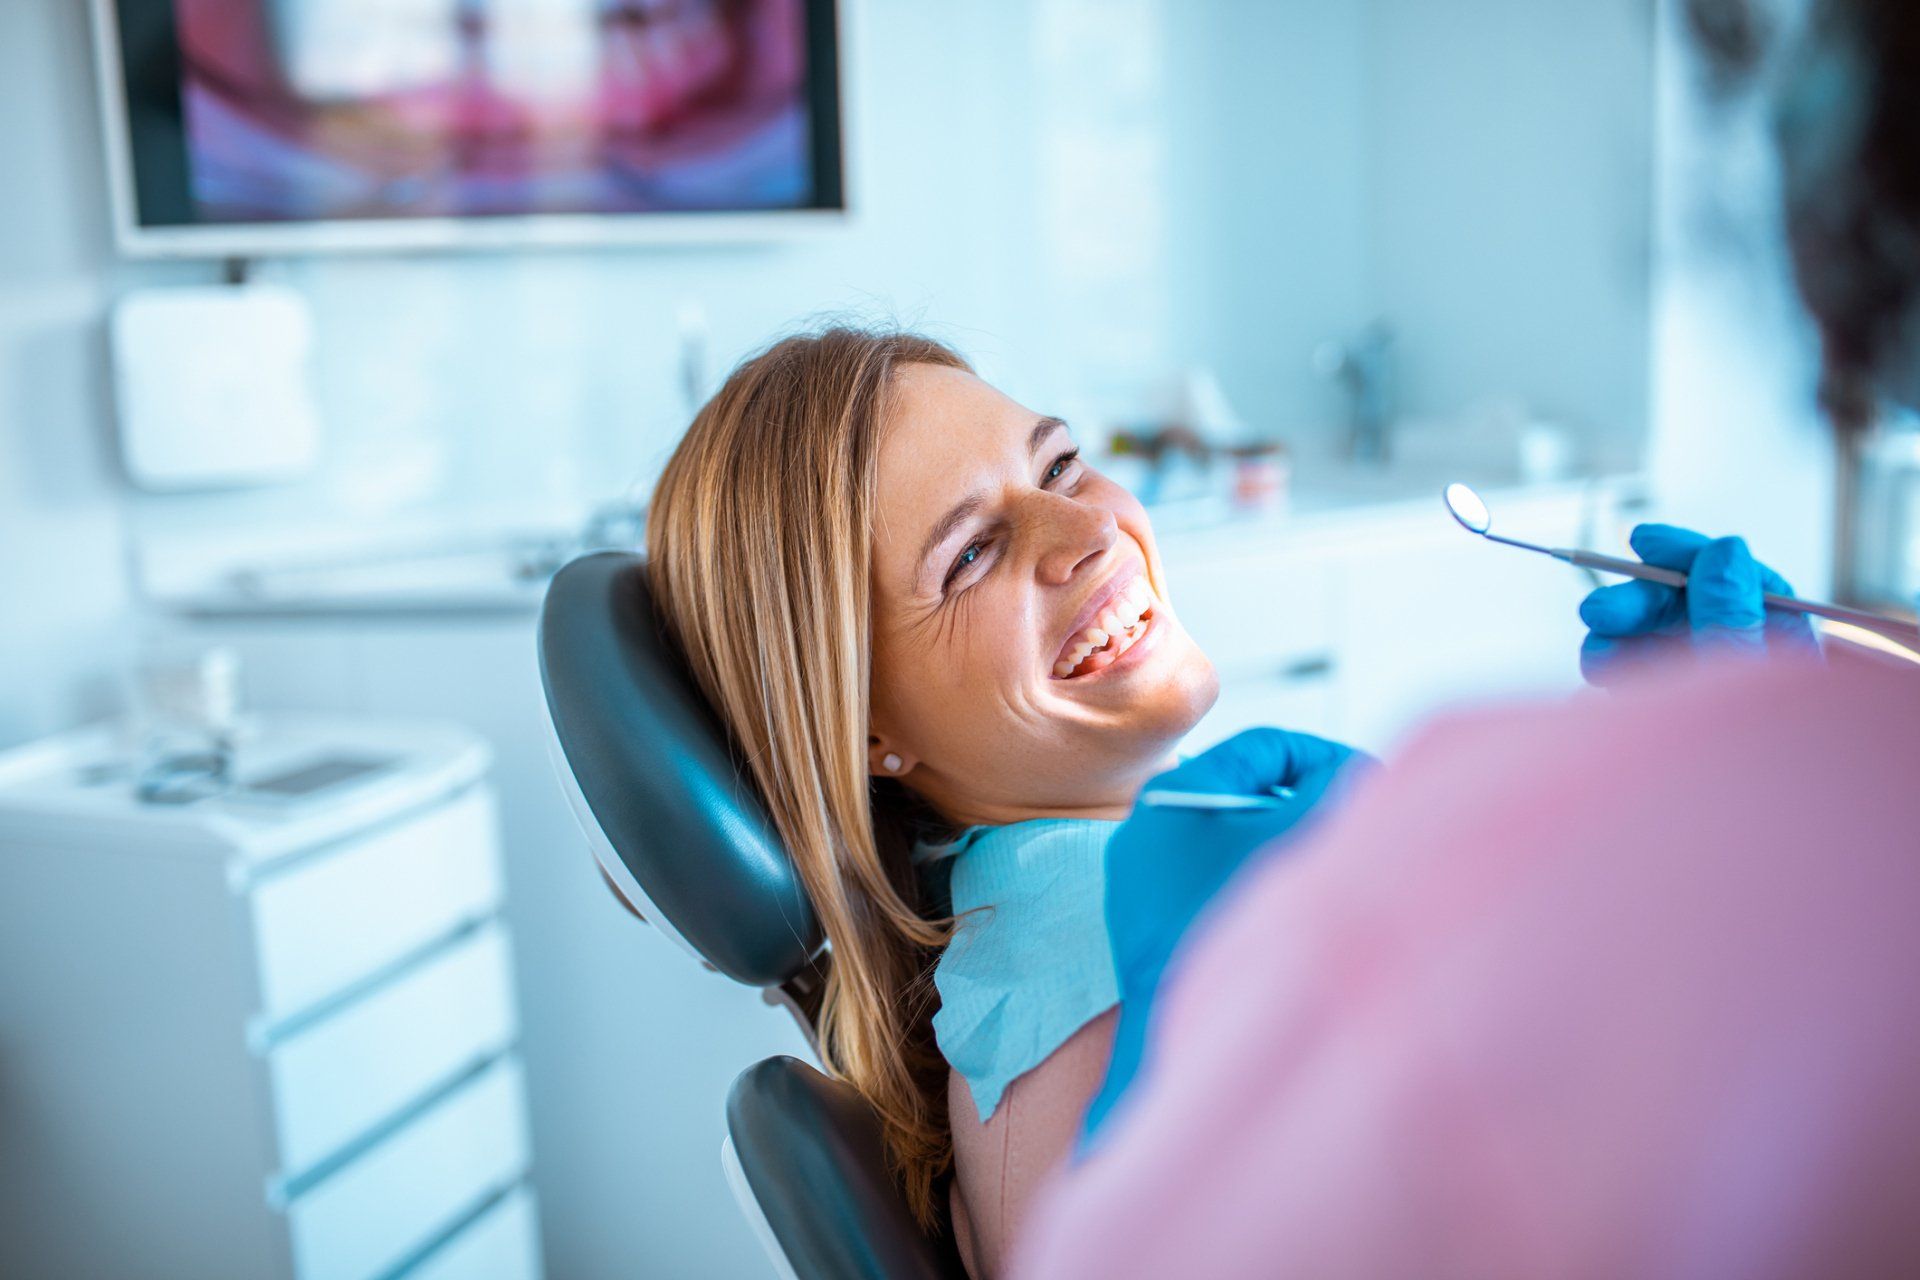 Shellharbour City Dental Wollongong